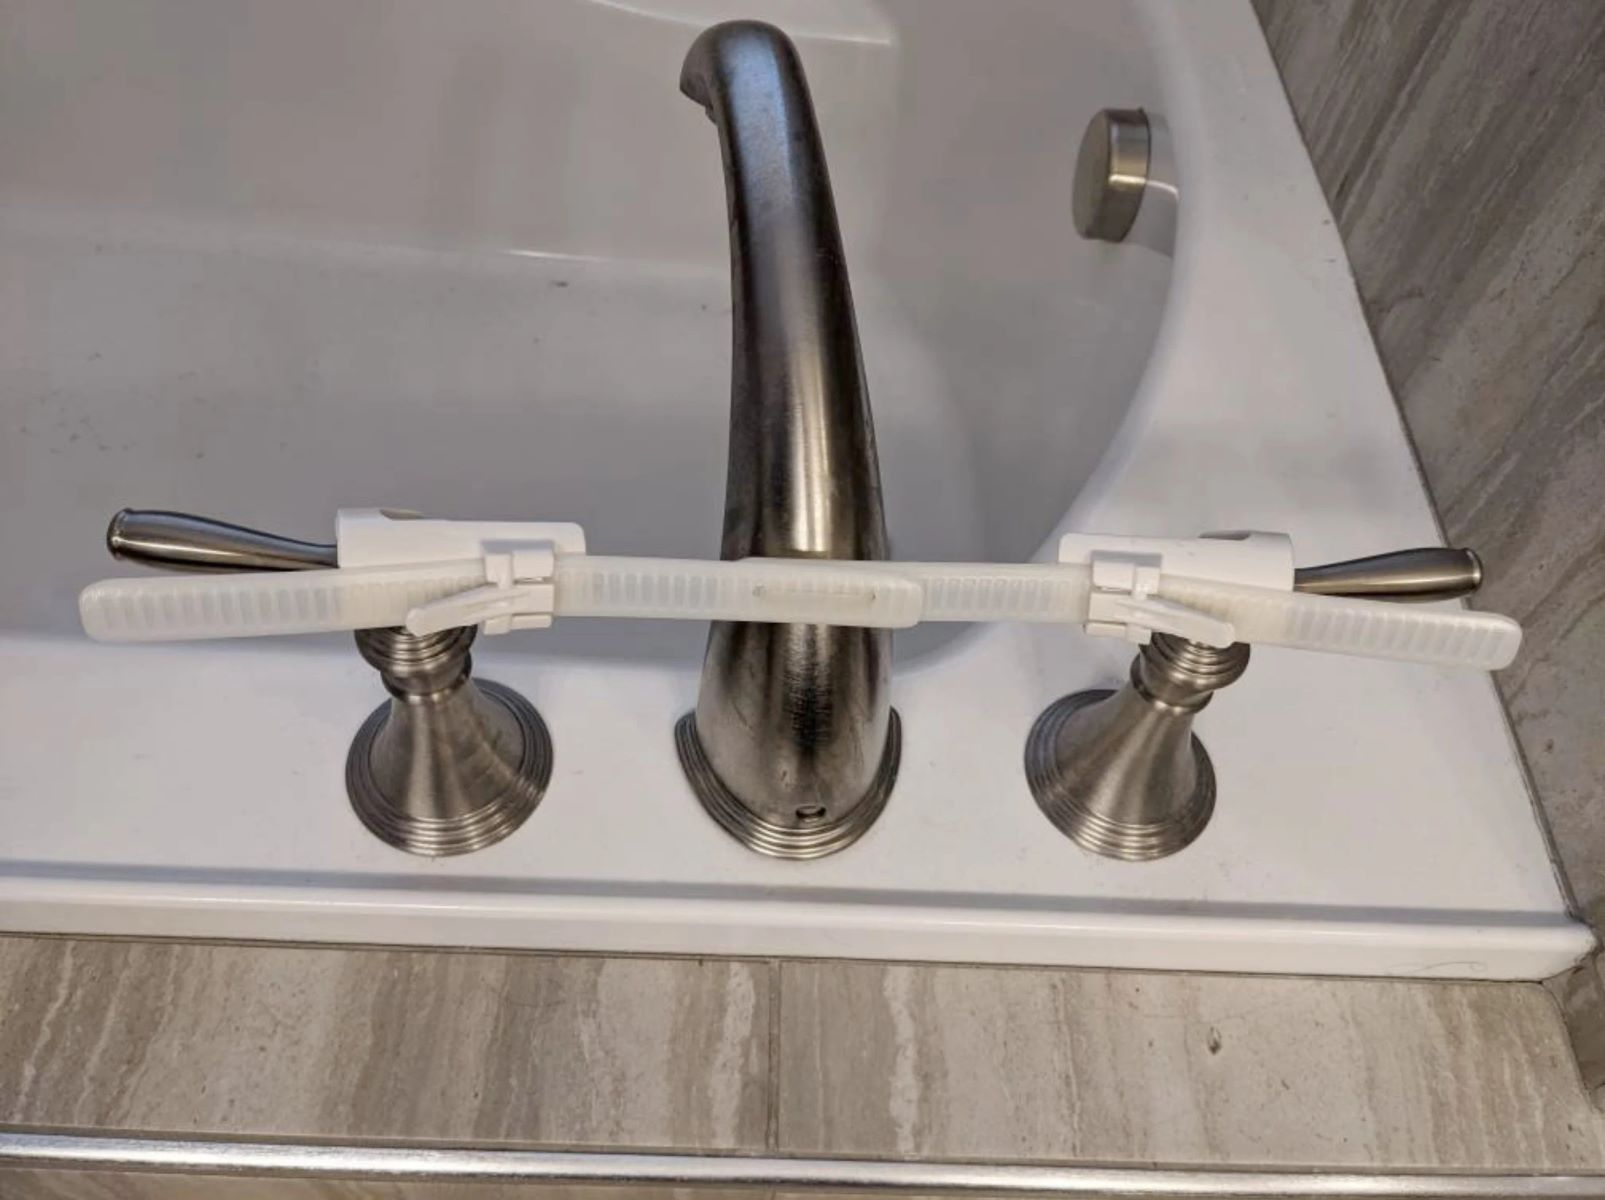 How To Childproof Bathtub Faucet Knobs And Hot Tub